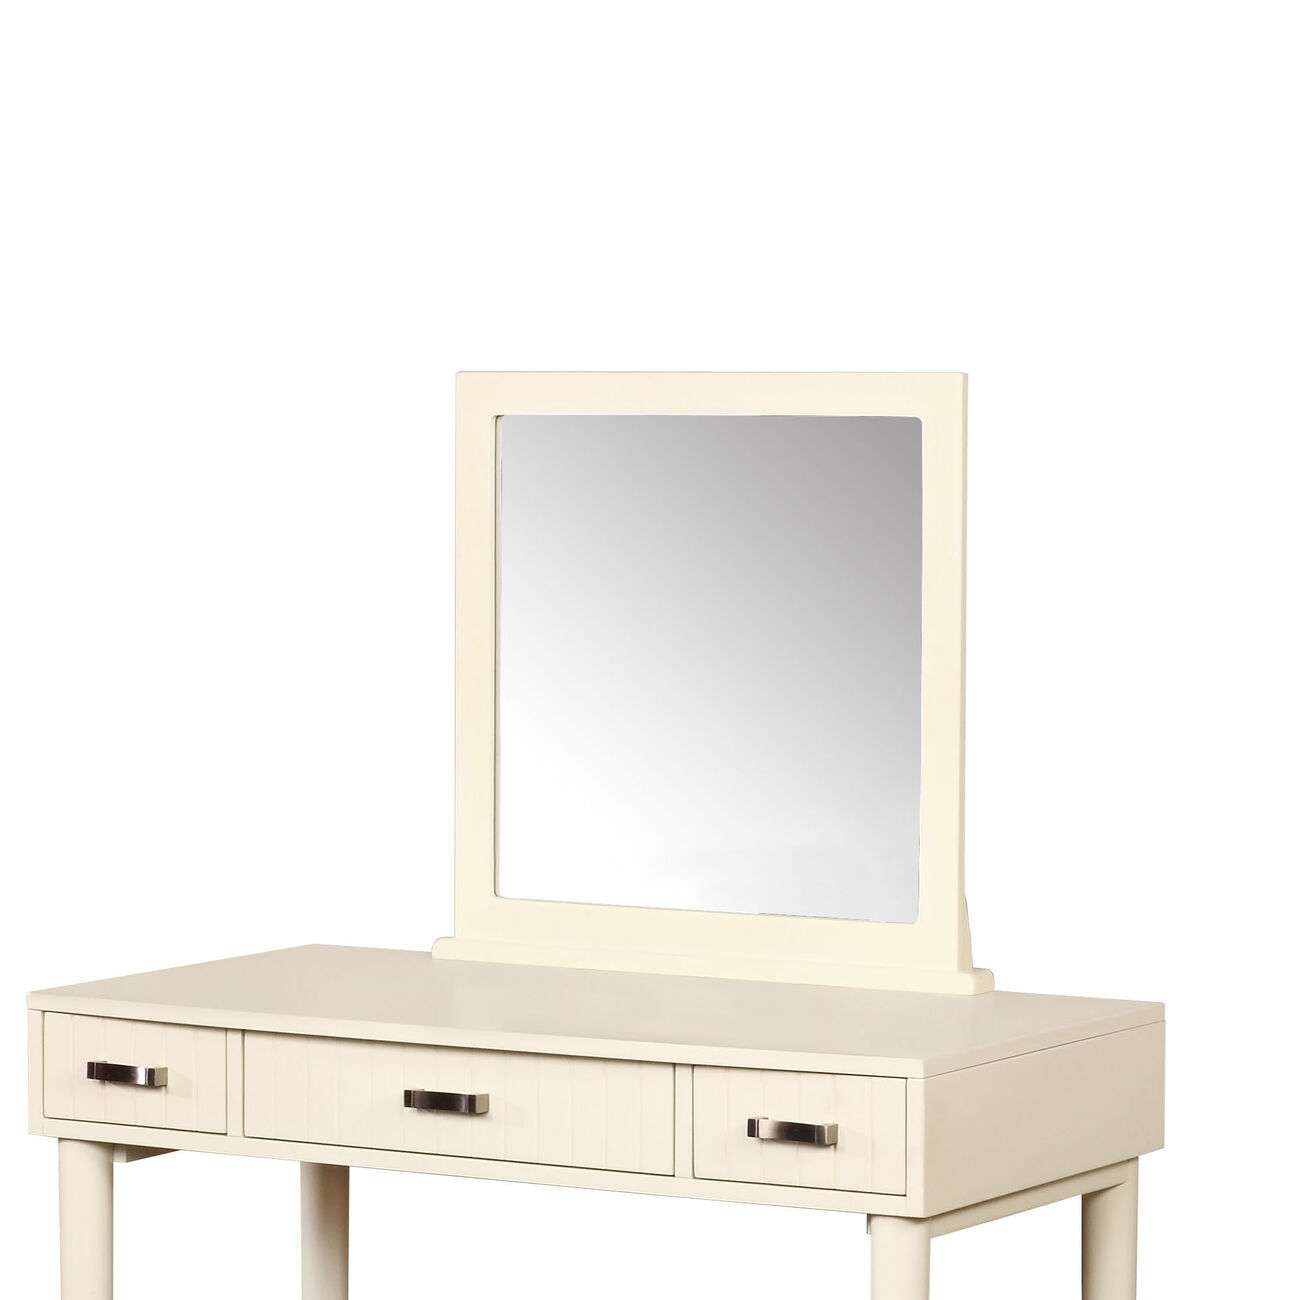 Wooden Vanity Set with 3 Drawers and Round Legs, Cream and Green